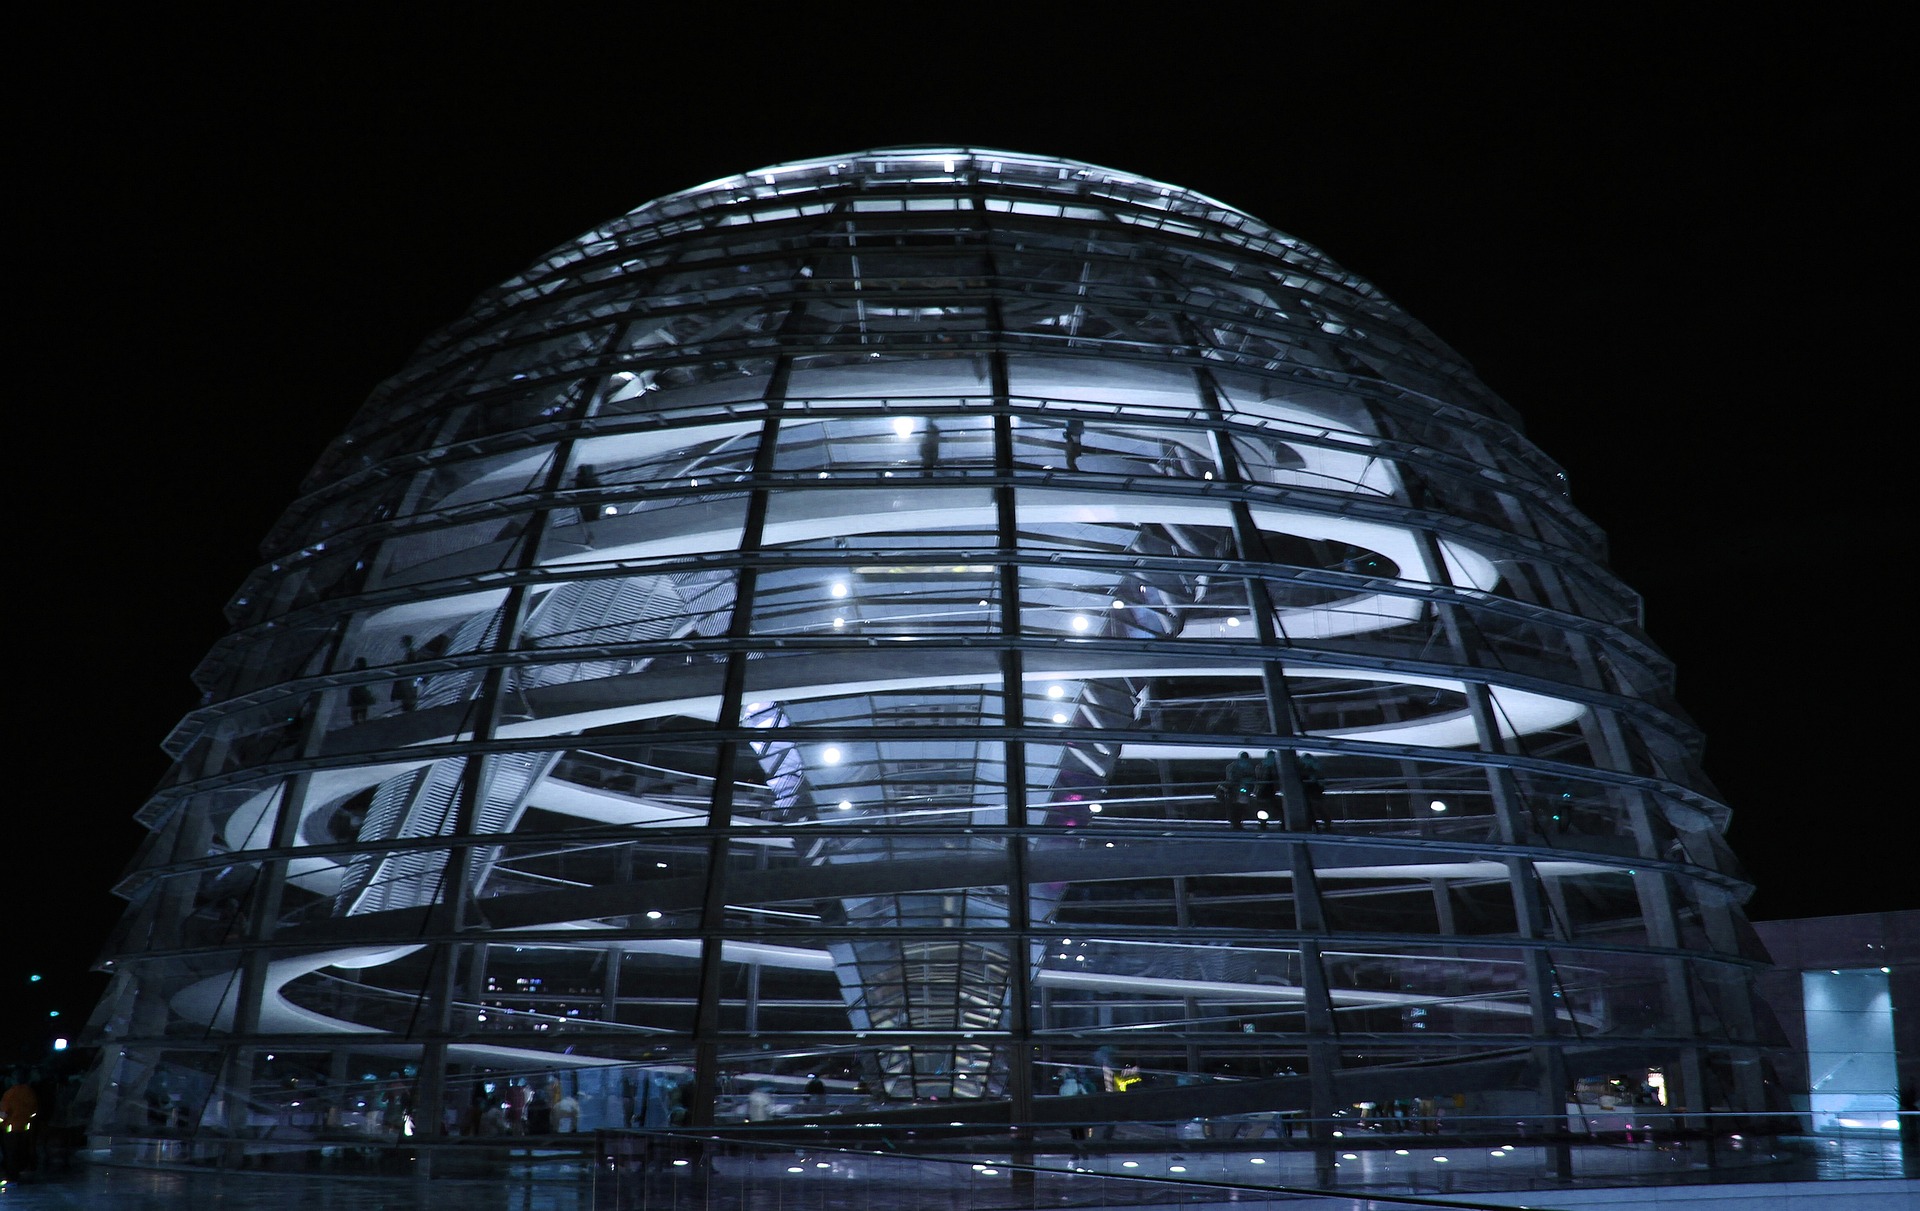 The German Bundestag, where the IT Security Act 2.0 was passed